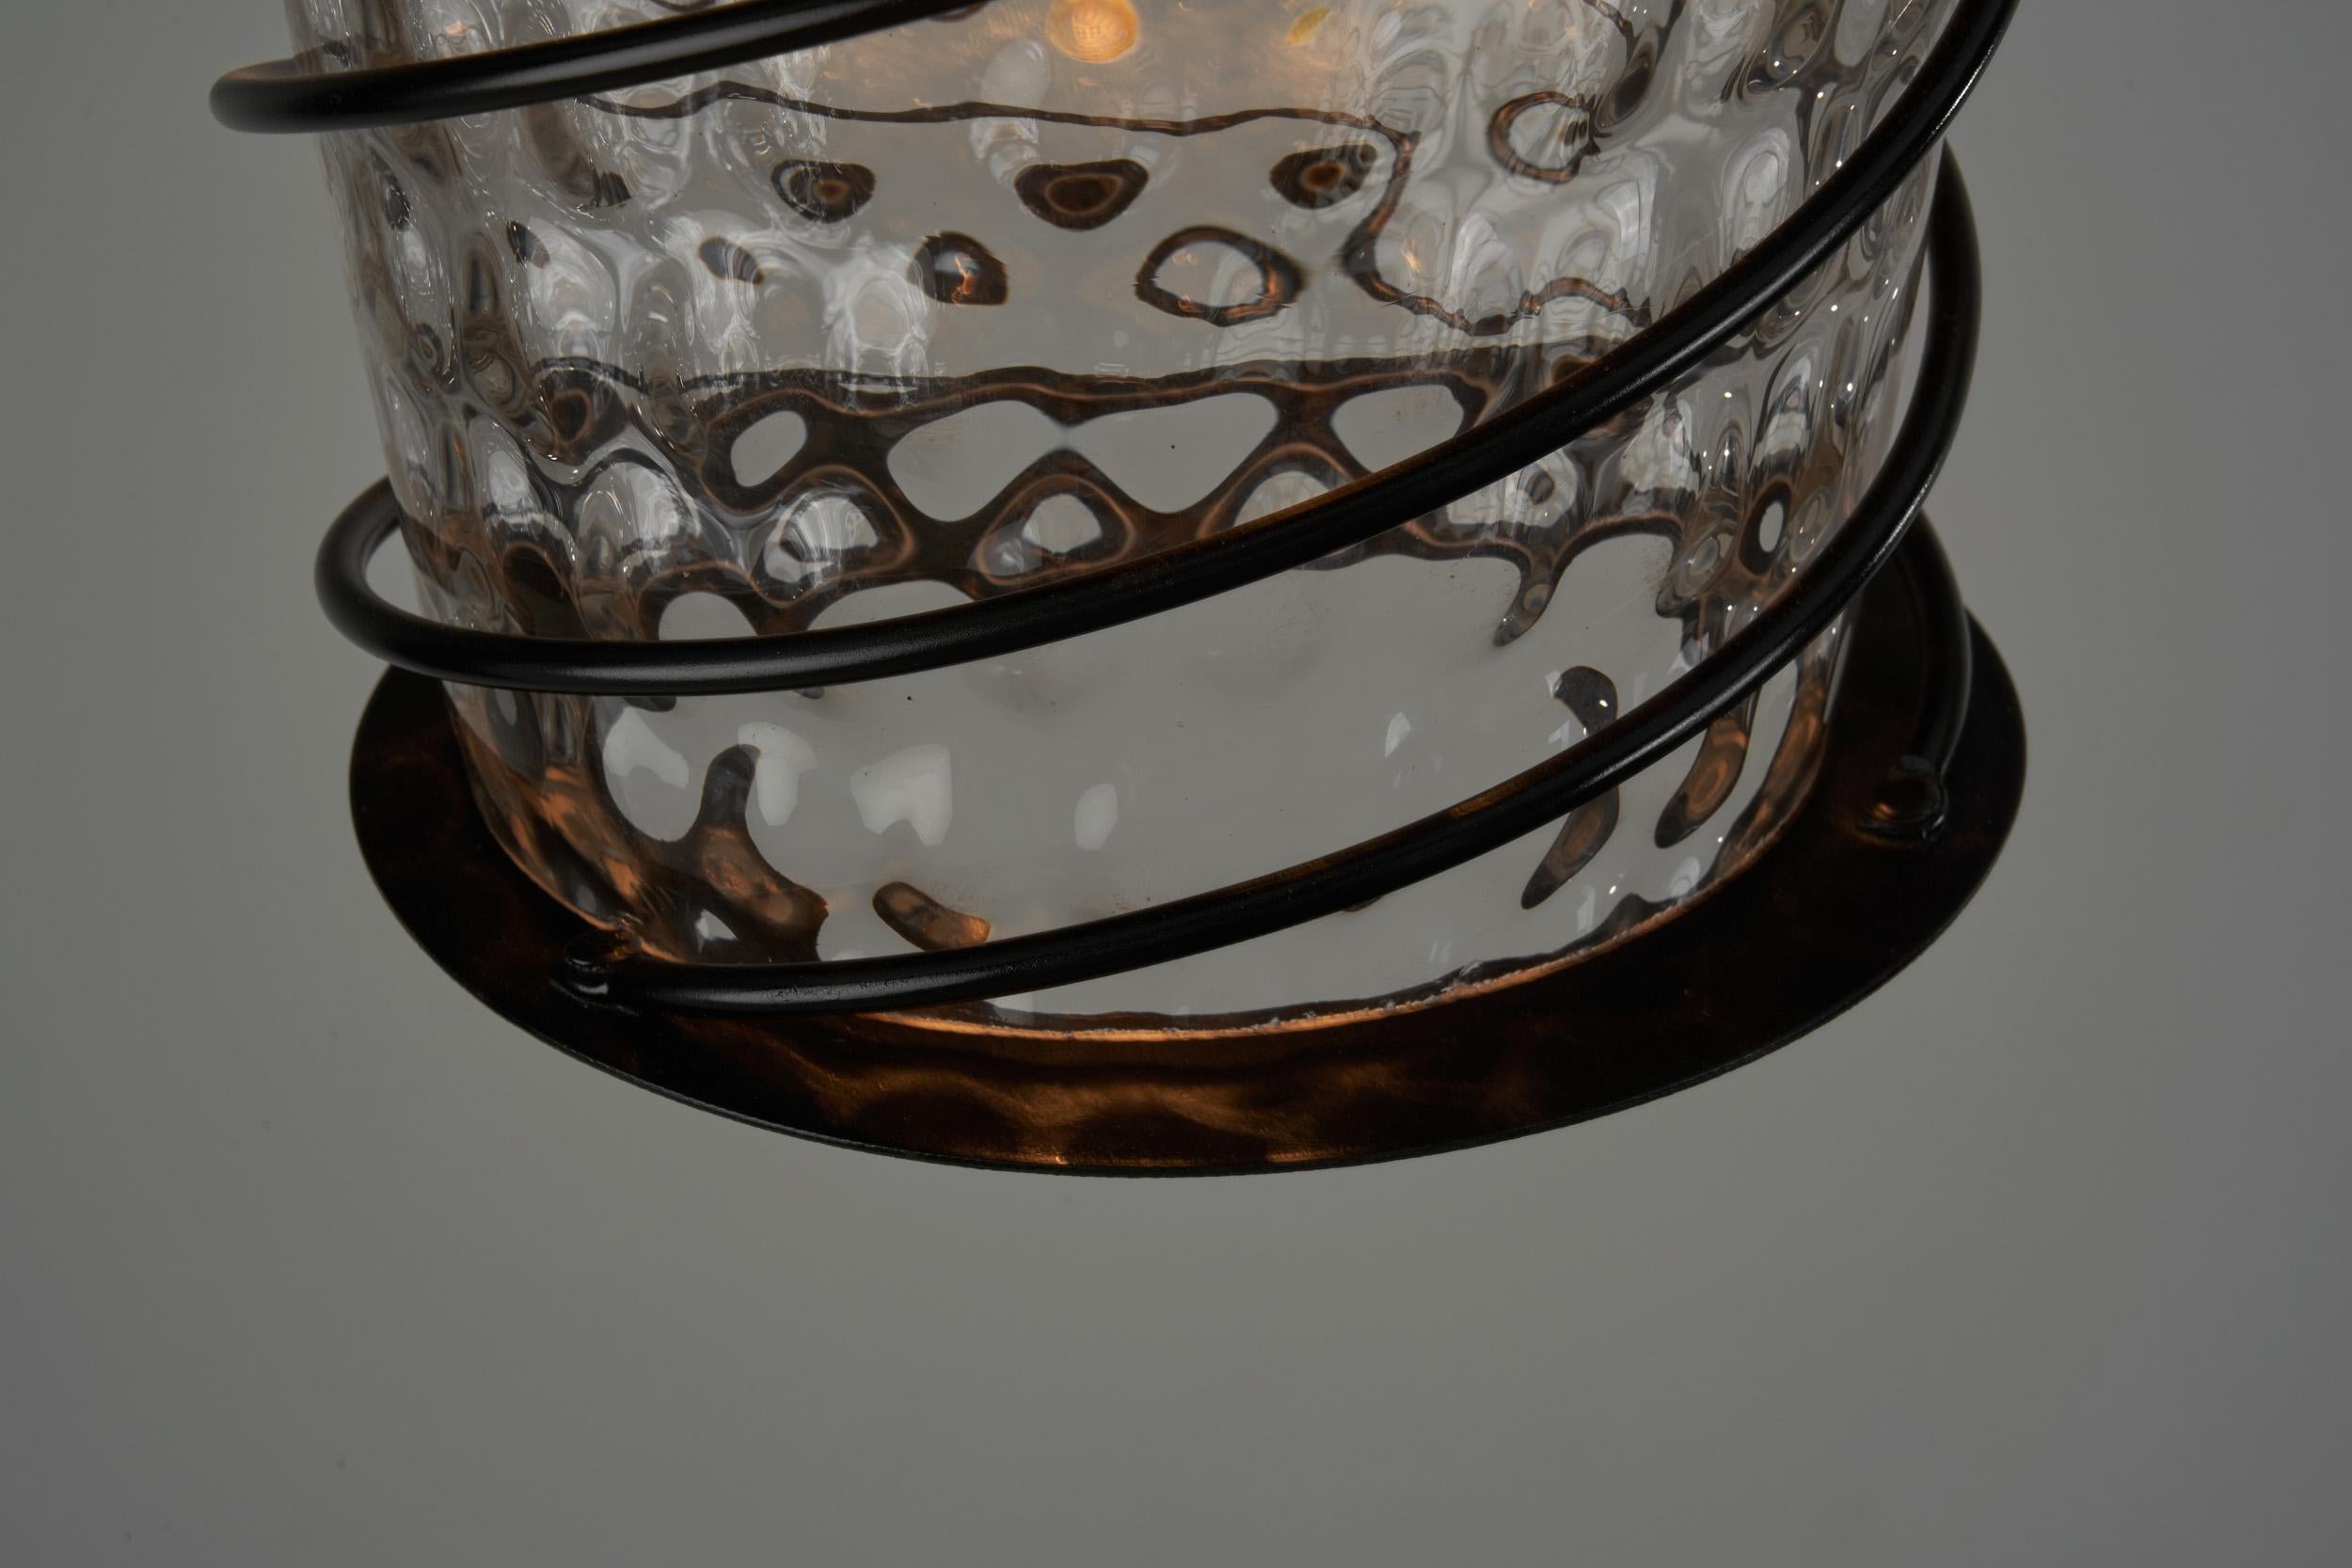 Scandinavian Tin and Glass Accent Ceiling Lamp, Scandinavia, 1920s For Sale 5